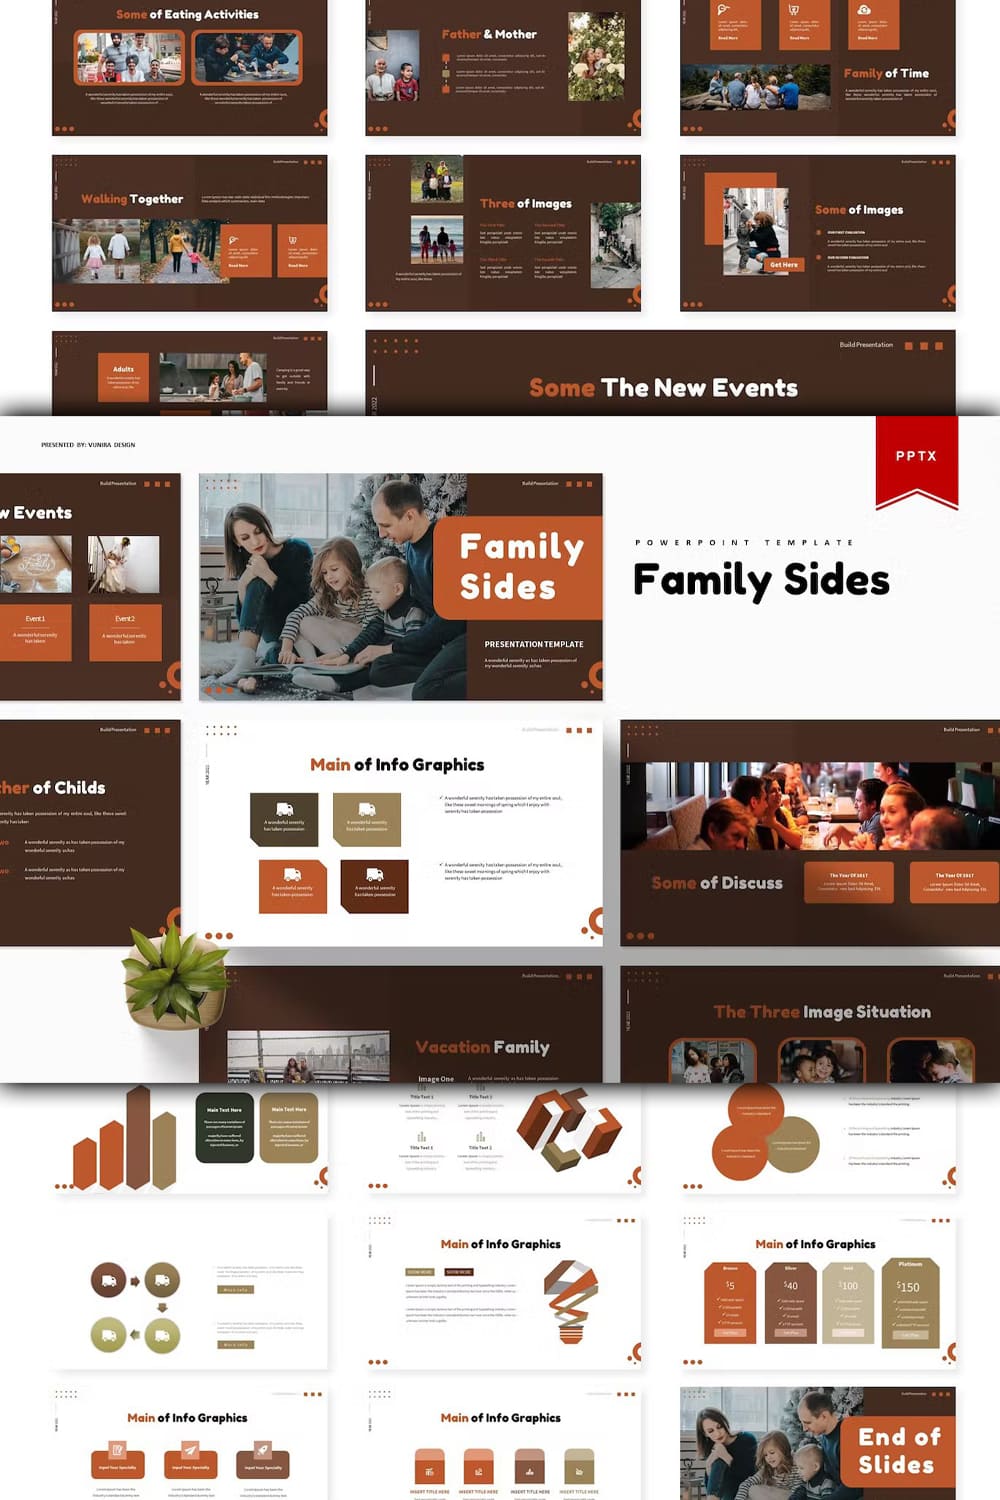 Familly sides powerpoint template - pinterest image preview.